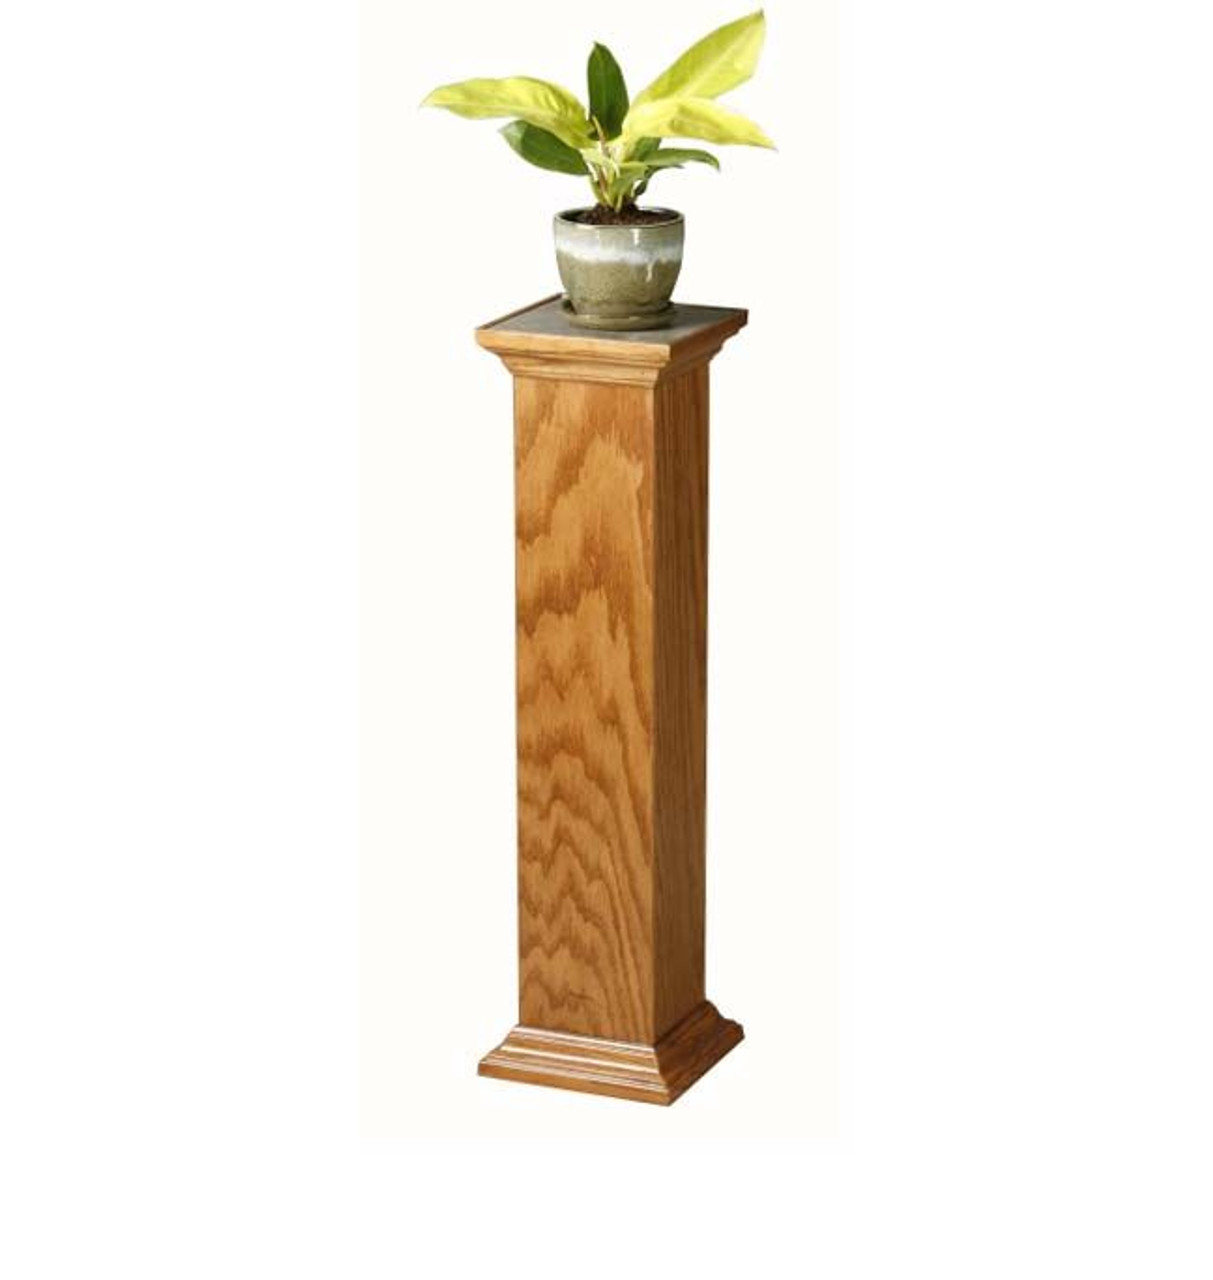 Oak Plant Stand / Speaker Stand with Ceramic Tile Top Hard Wood Accent Furniture Oak Column Style Design Plant Stand Surround Sound Speaker Stand Home Accent Display Stand, Eagle Part # E-63936